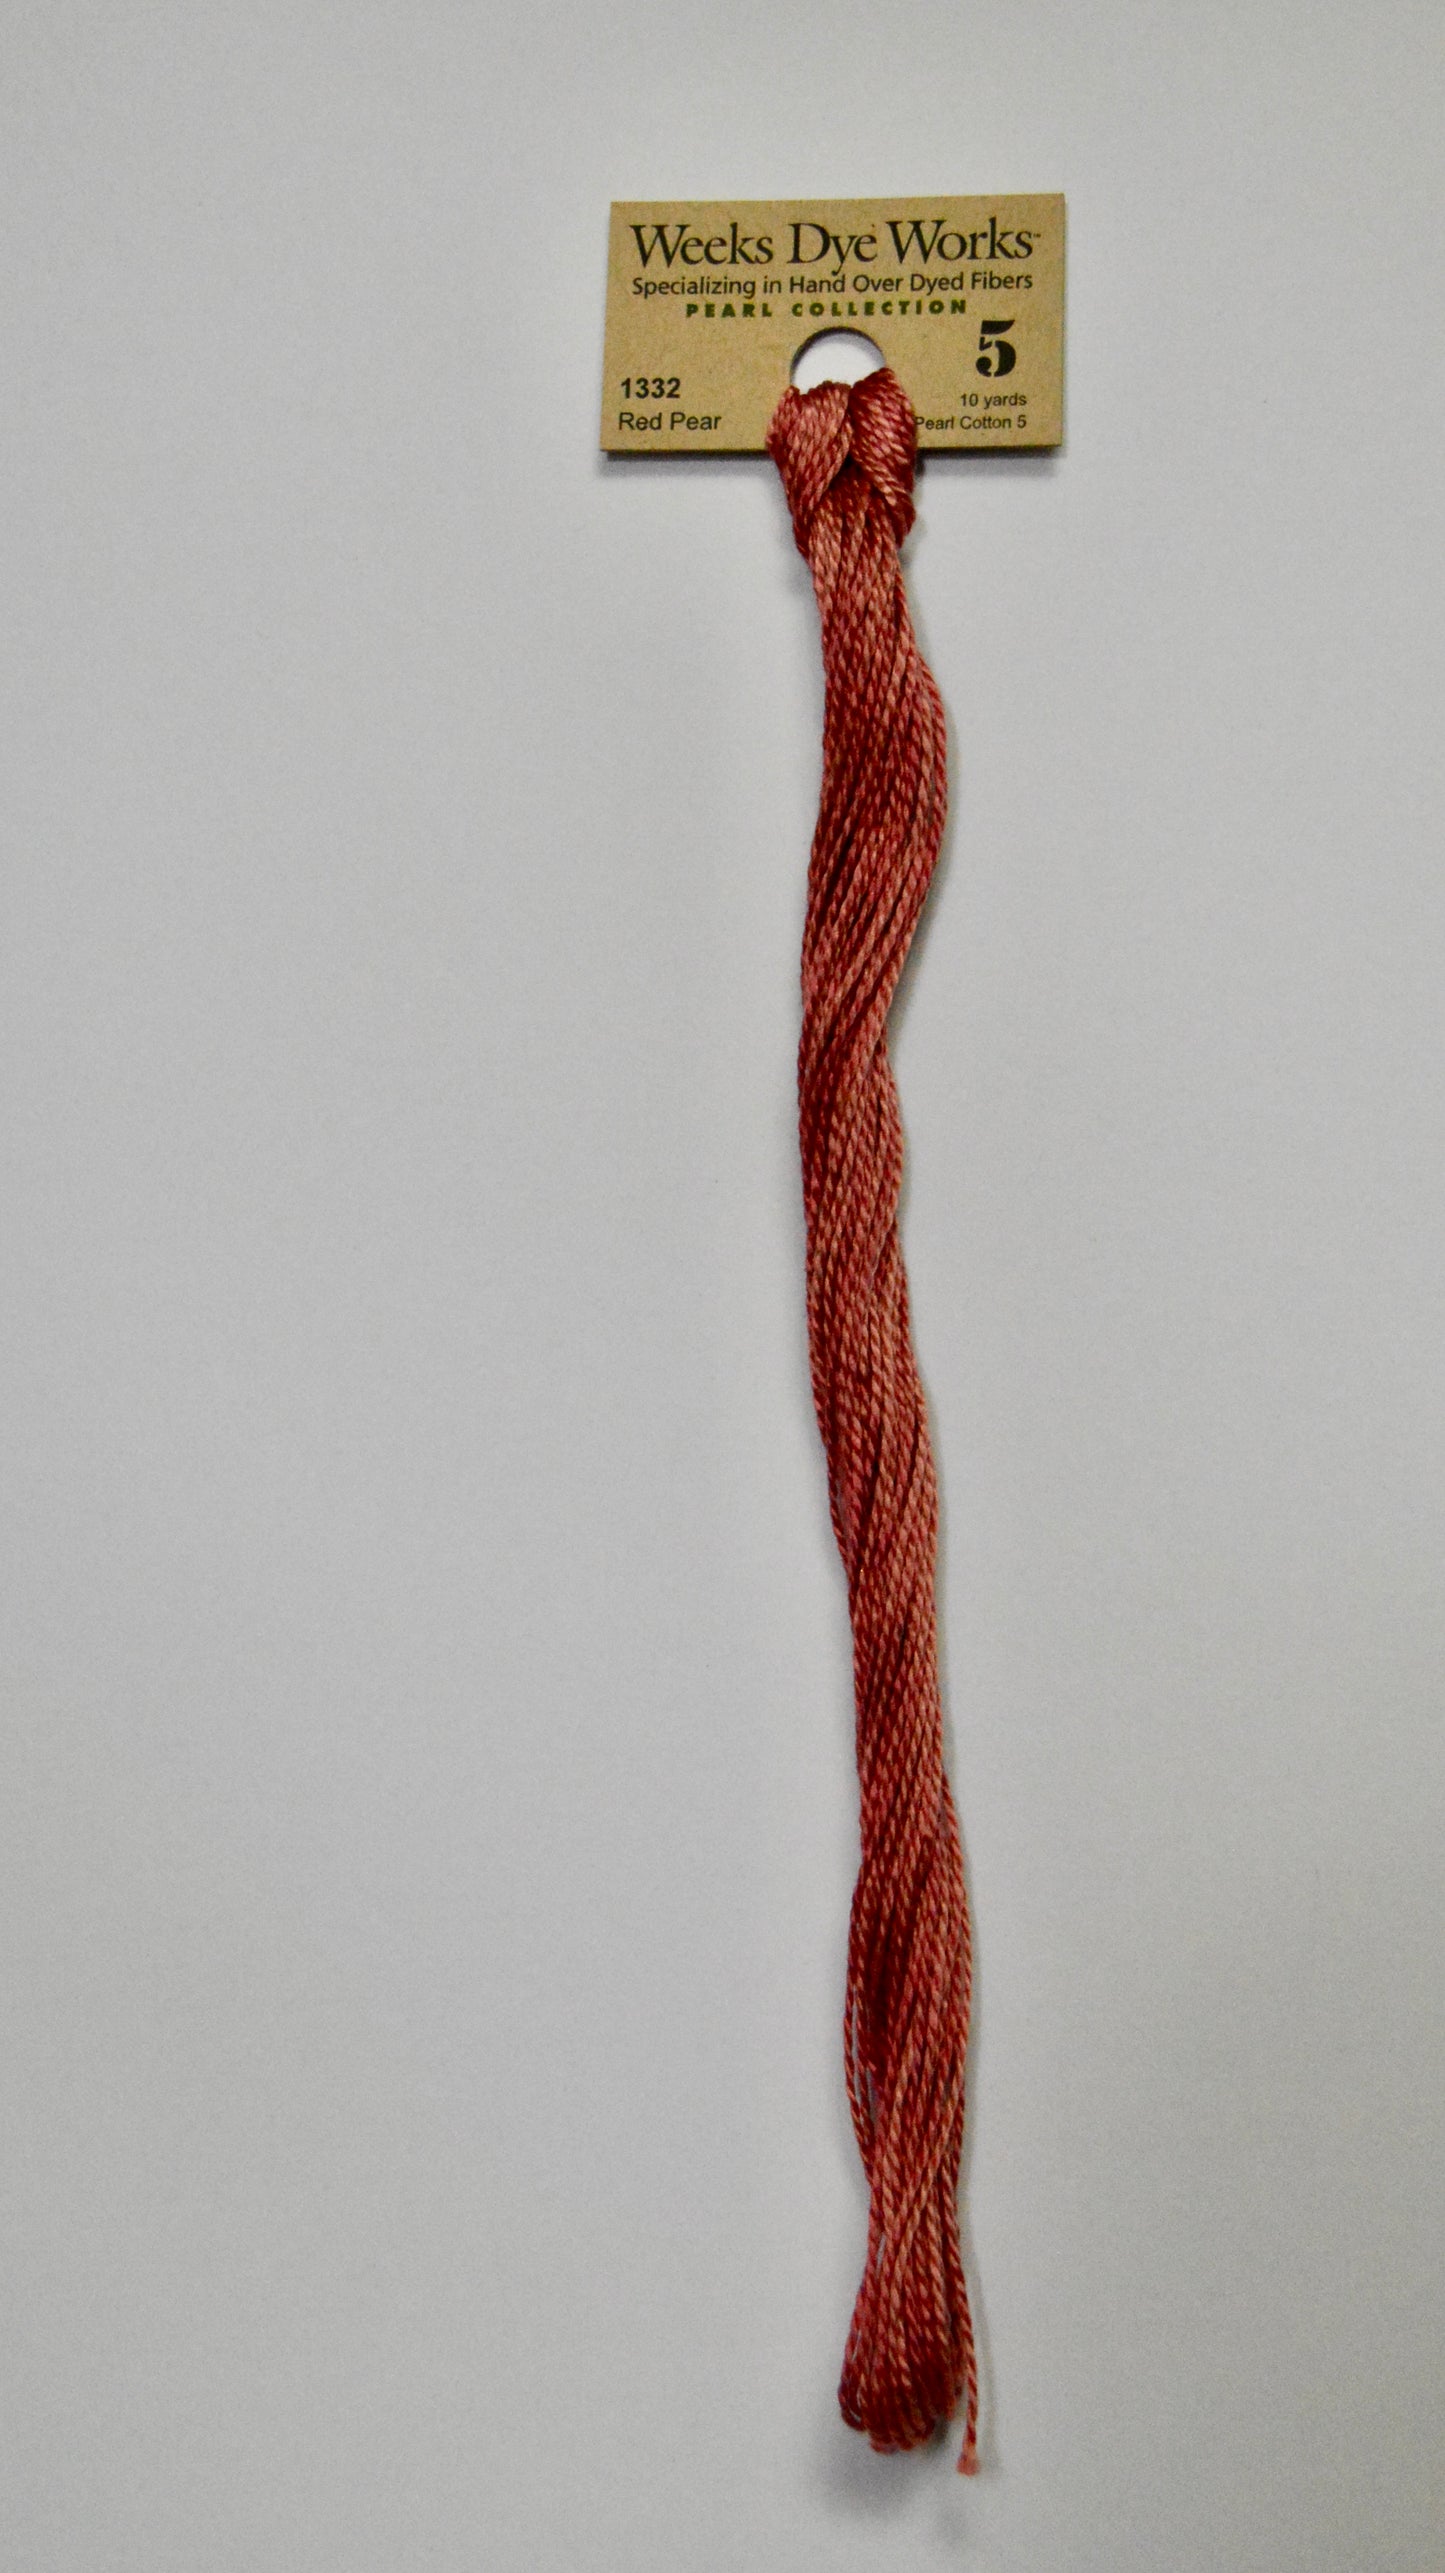 Red Pear 1332 Weeks Dye Works Perle #5 Hand-Dyed Embroidery Floss